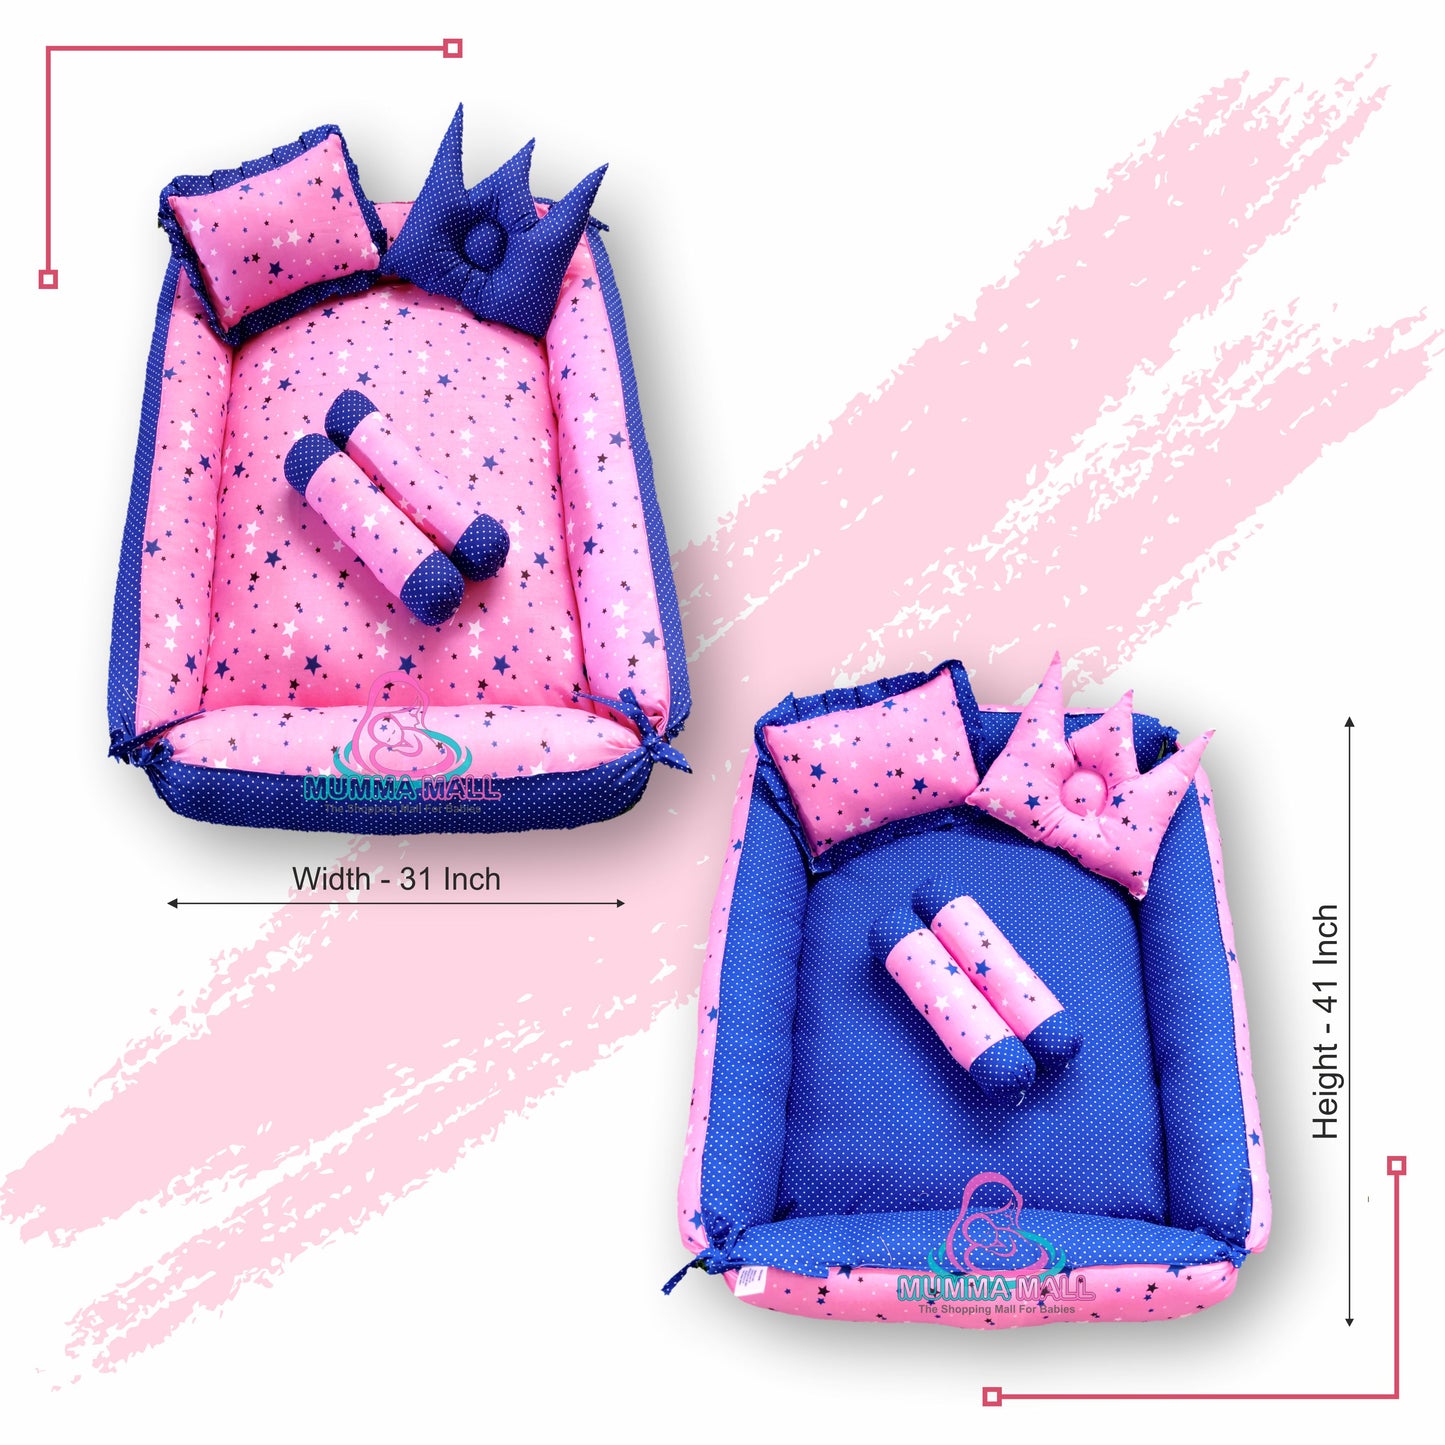 Baby box mattress set with set of 4 pillows as neck support, side support and toy (Pink and Blue)